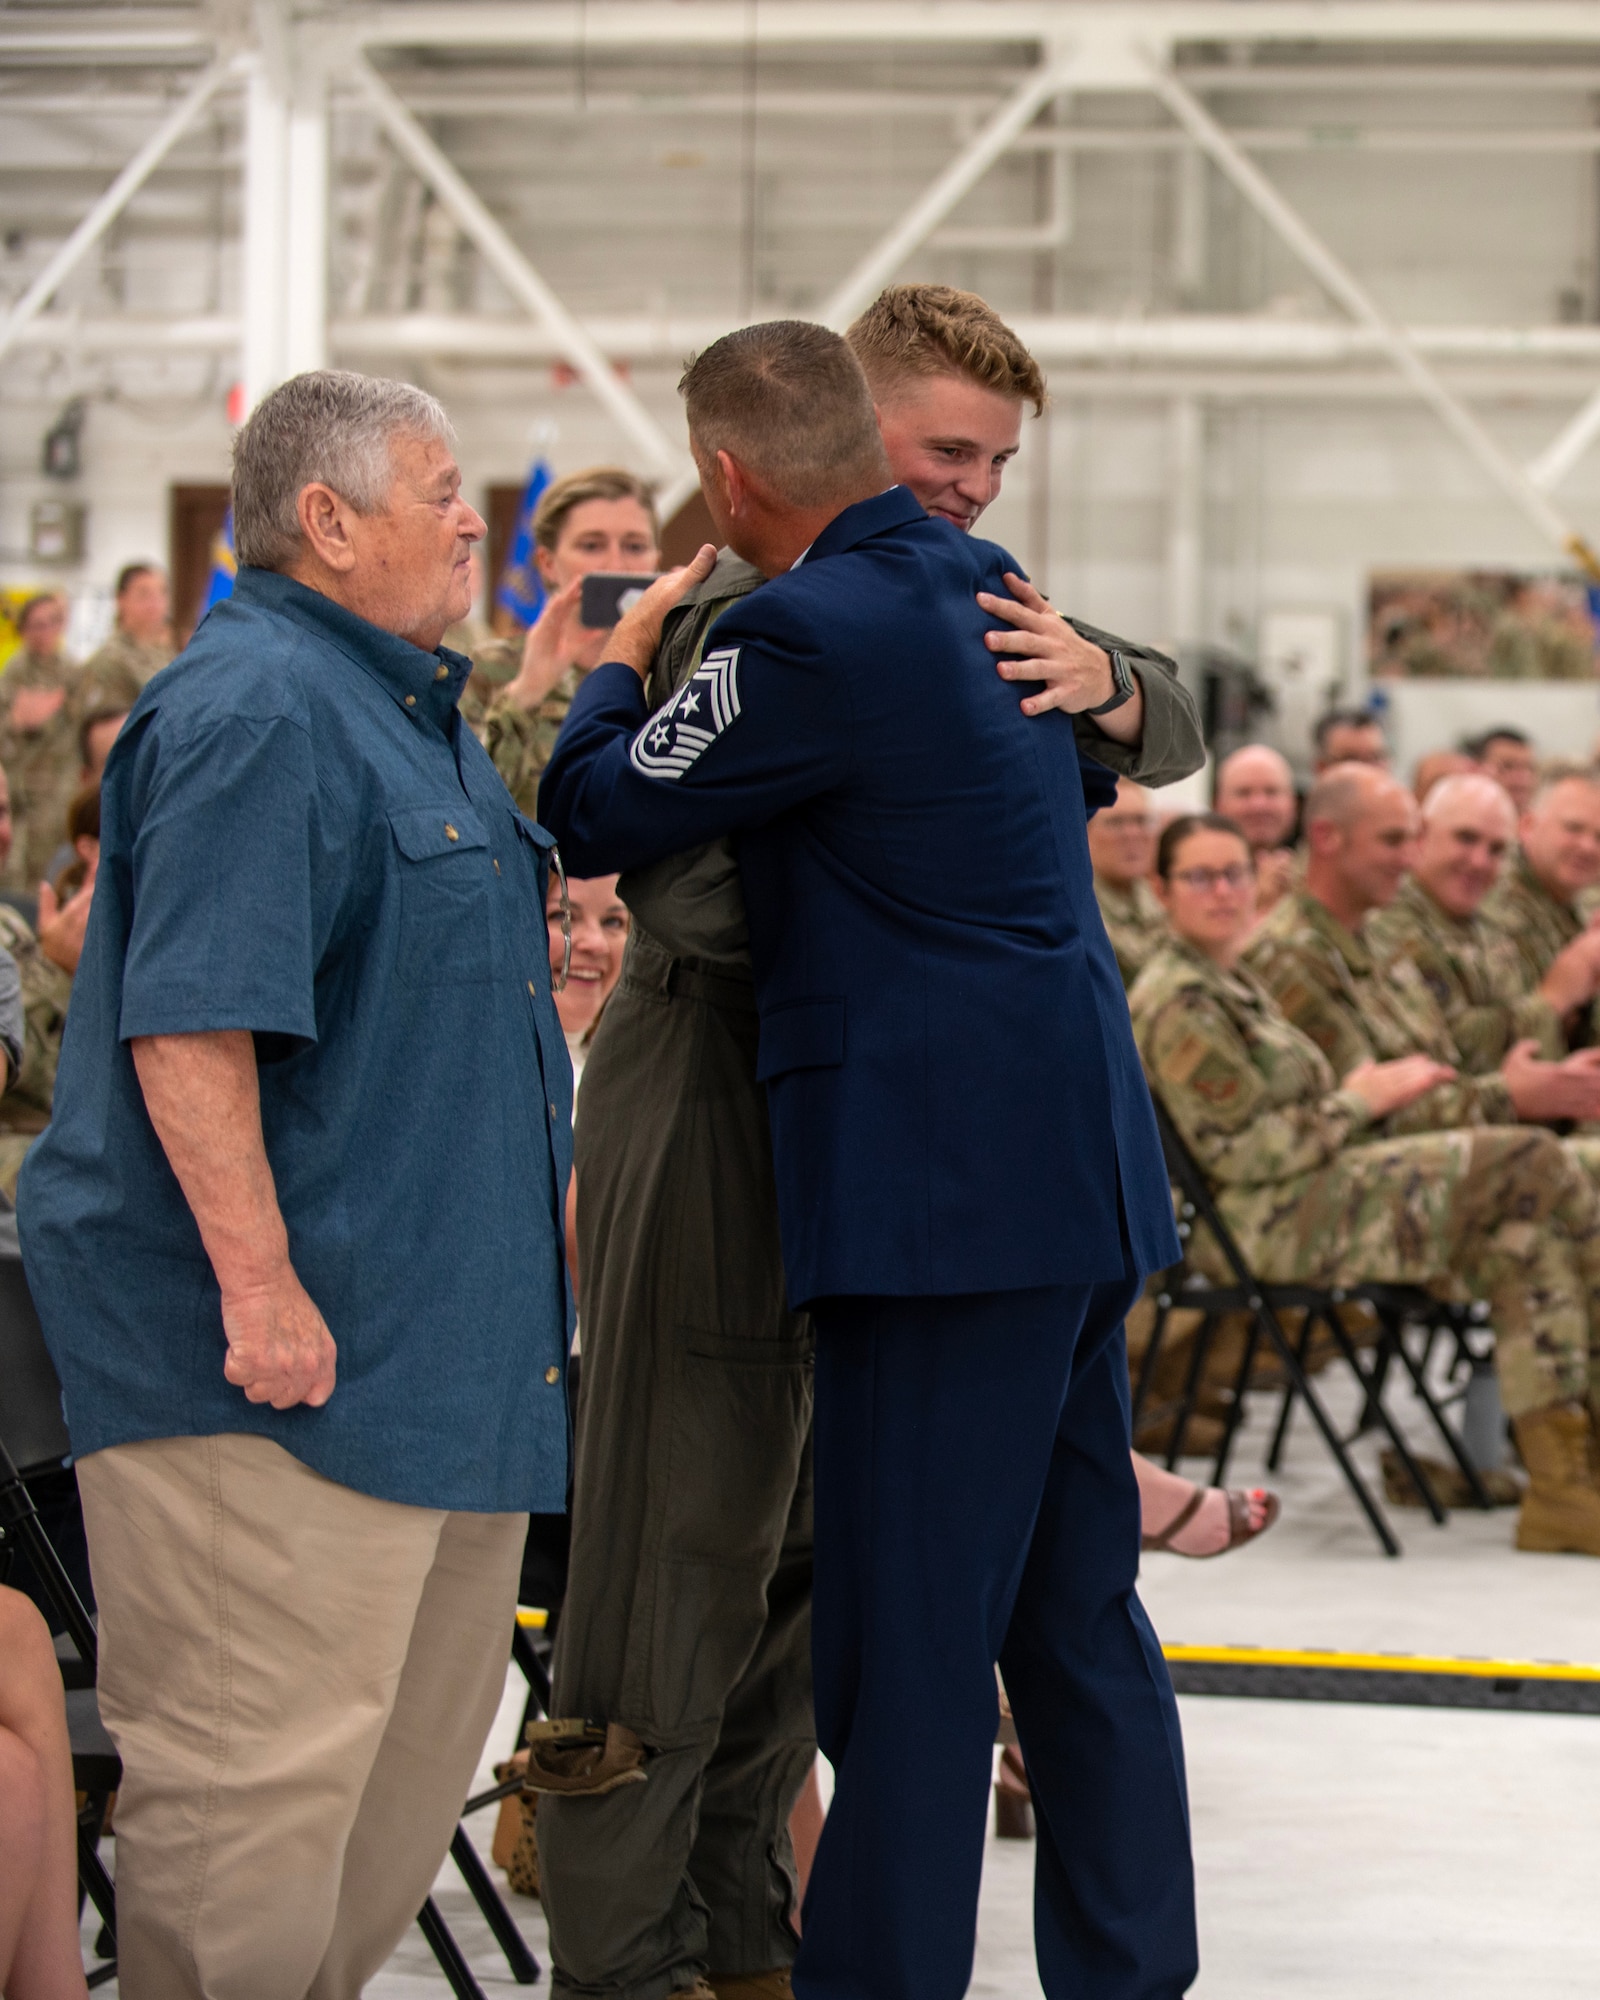 U.S. Air Force Airmen from the 133rd Airlift Wing, along with friends and family of U.S. Air Force Chief Master Sgt. Mark Legvold and Richard Schumacher, gather for a change of responsibility ceremony in St. Paul, Minn., Sept. 9, 2023.